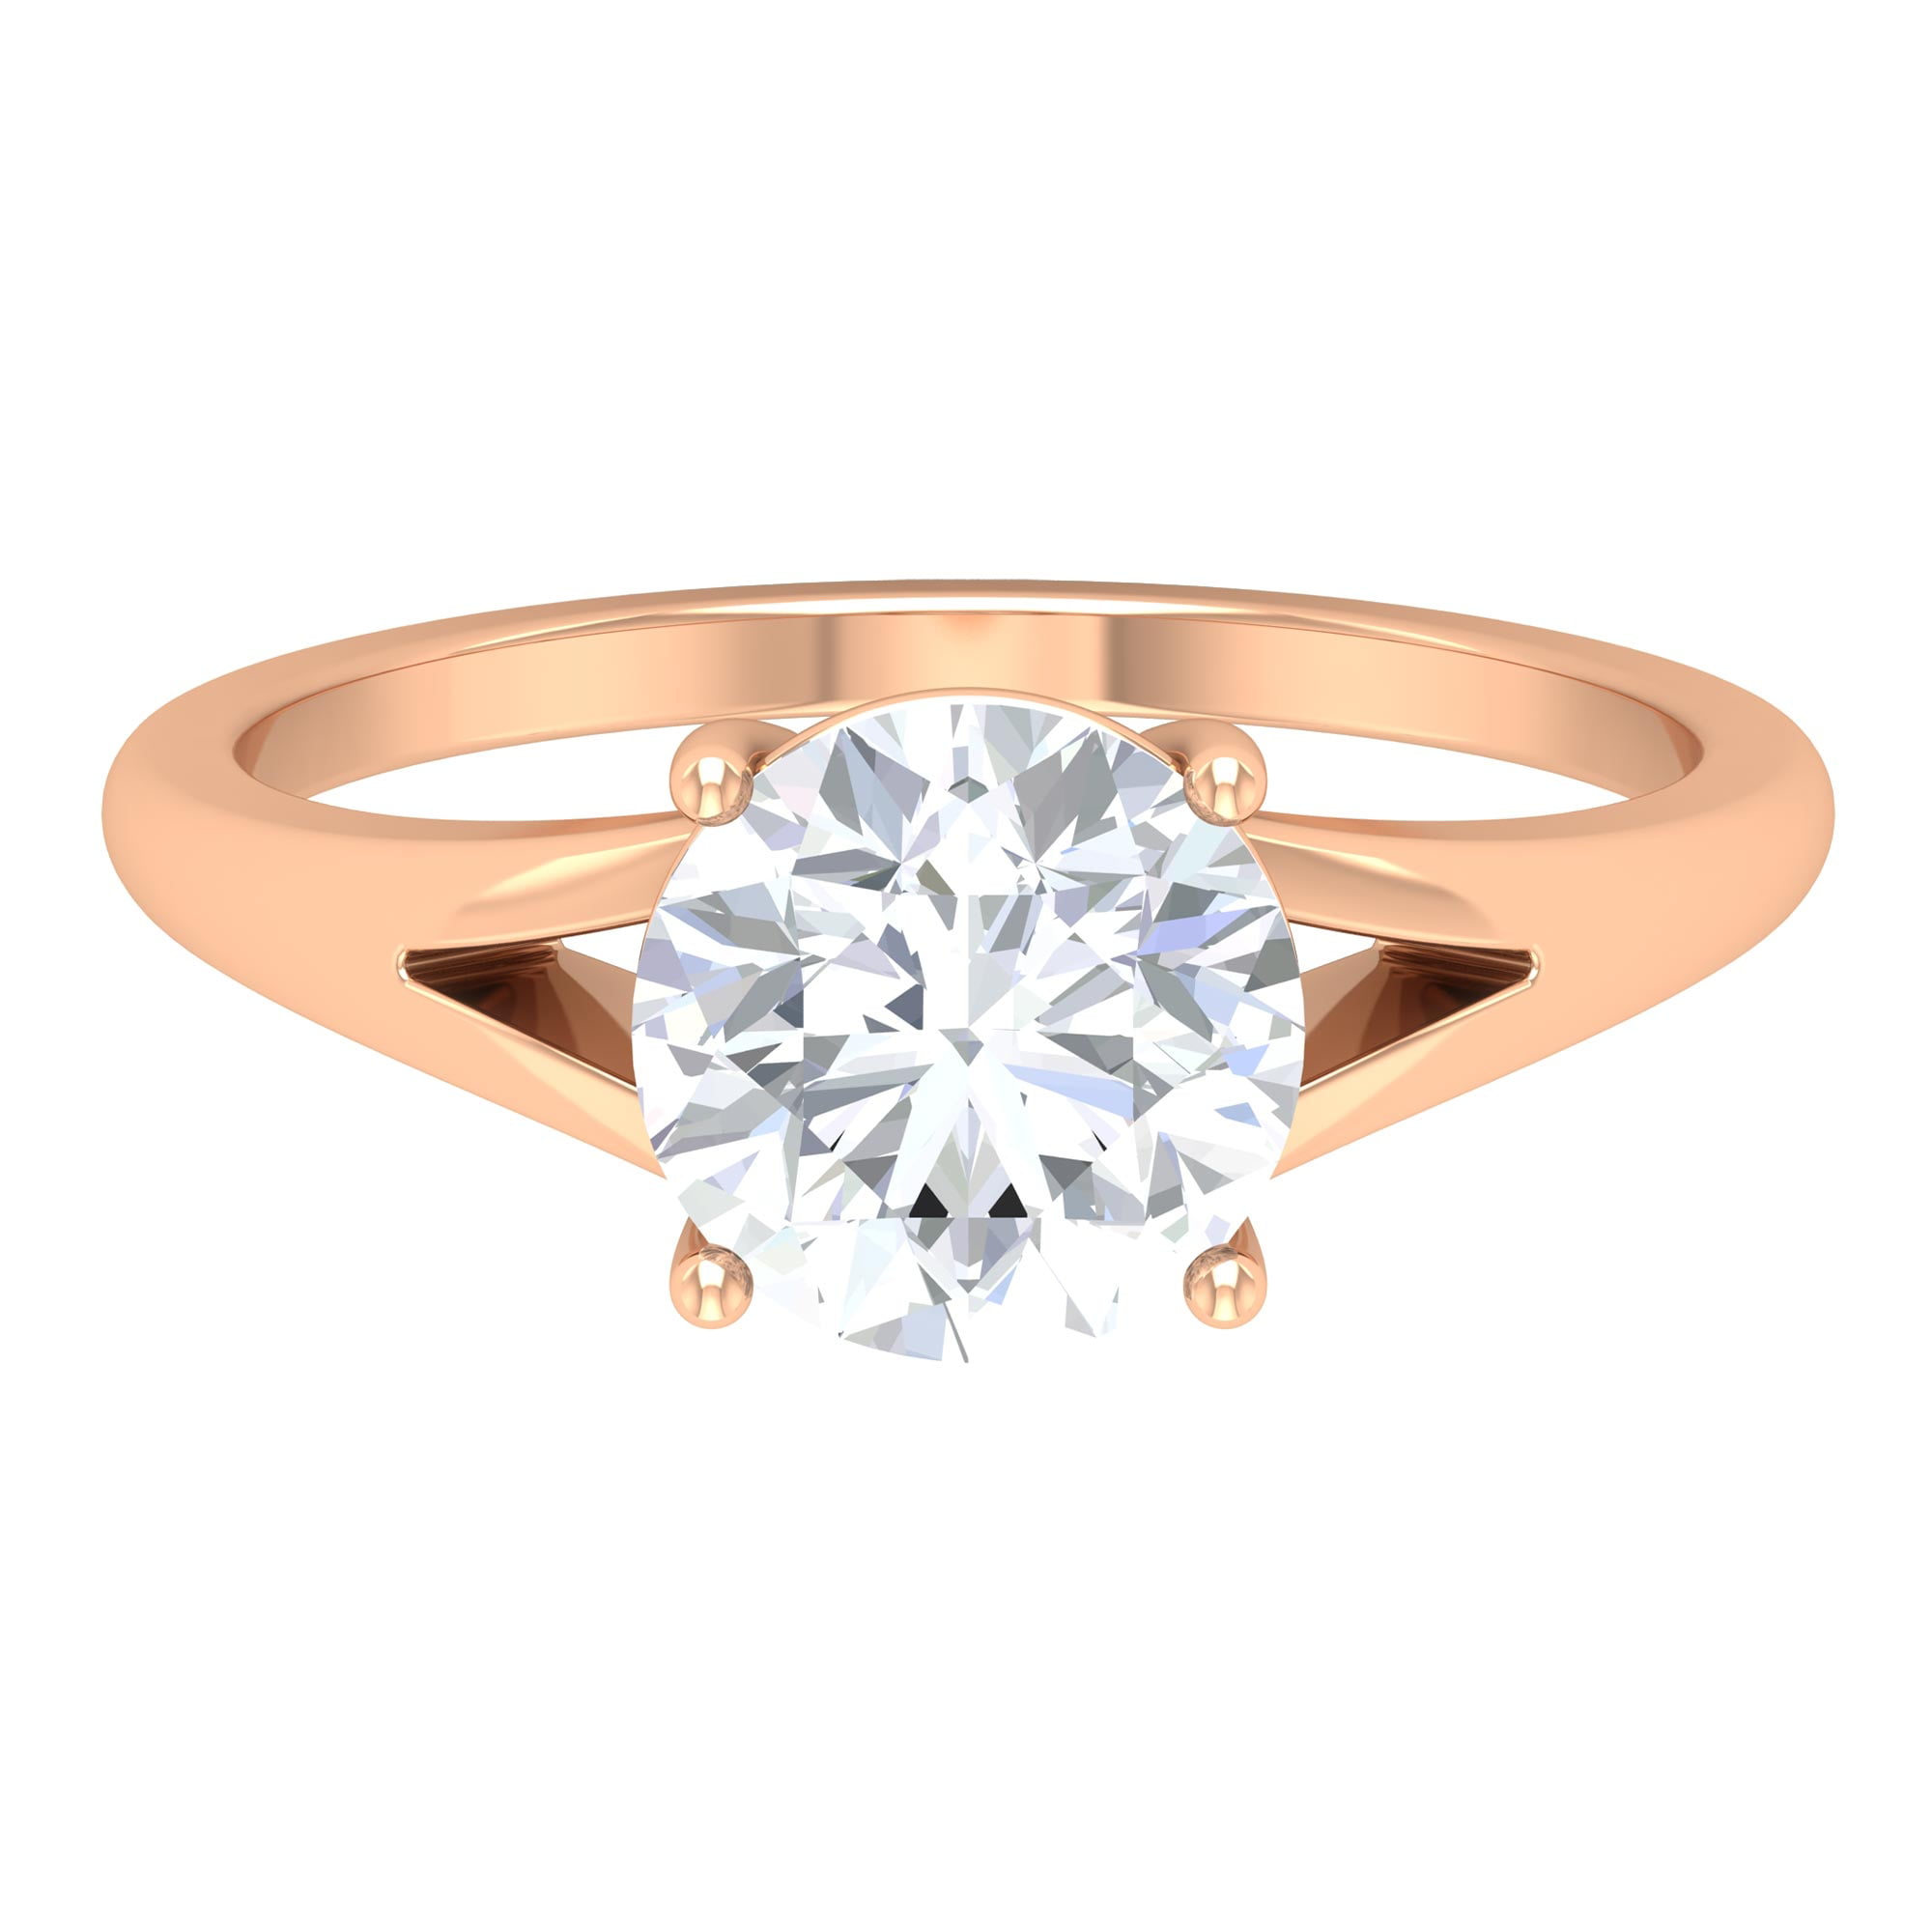 2.CT Round Cut Near White Real Moissanite Engagement Ring Solid 14k Yellow Gold 